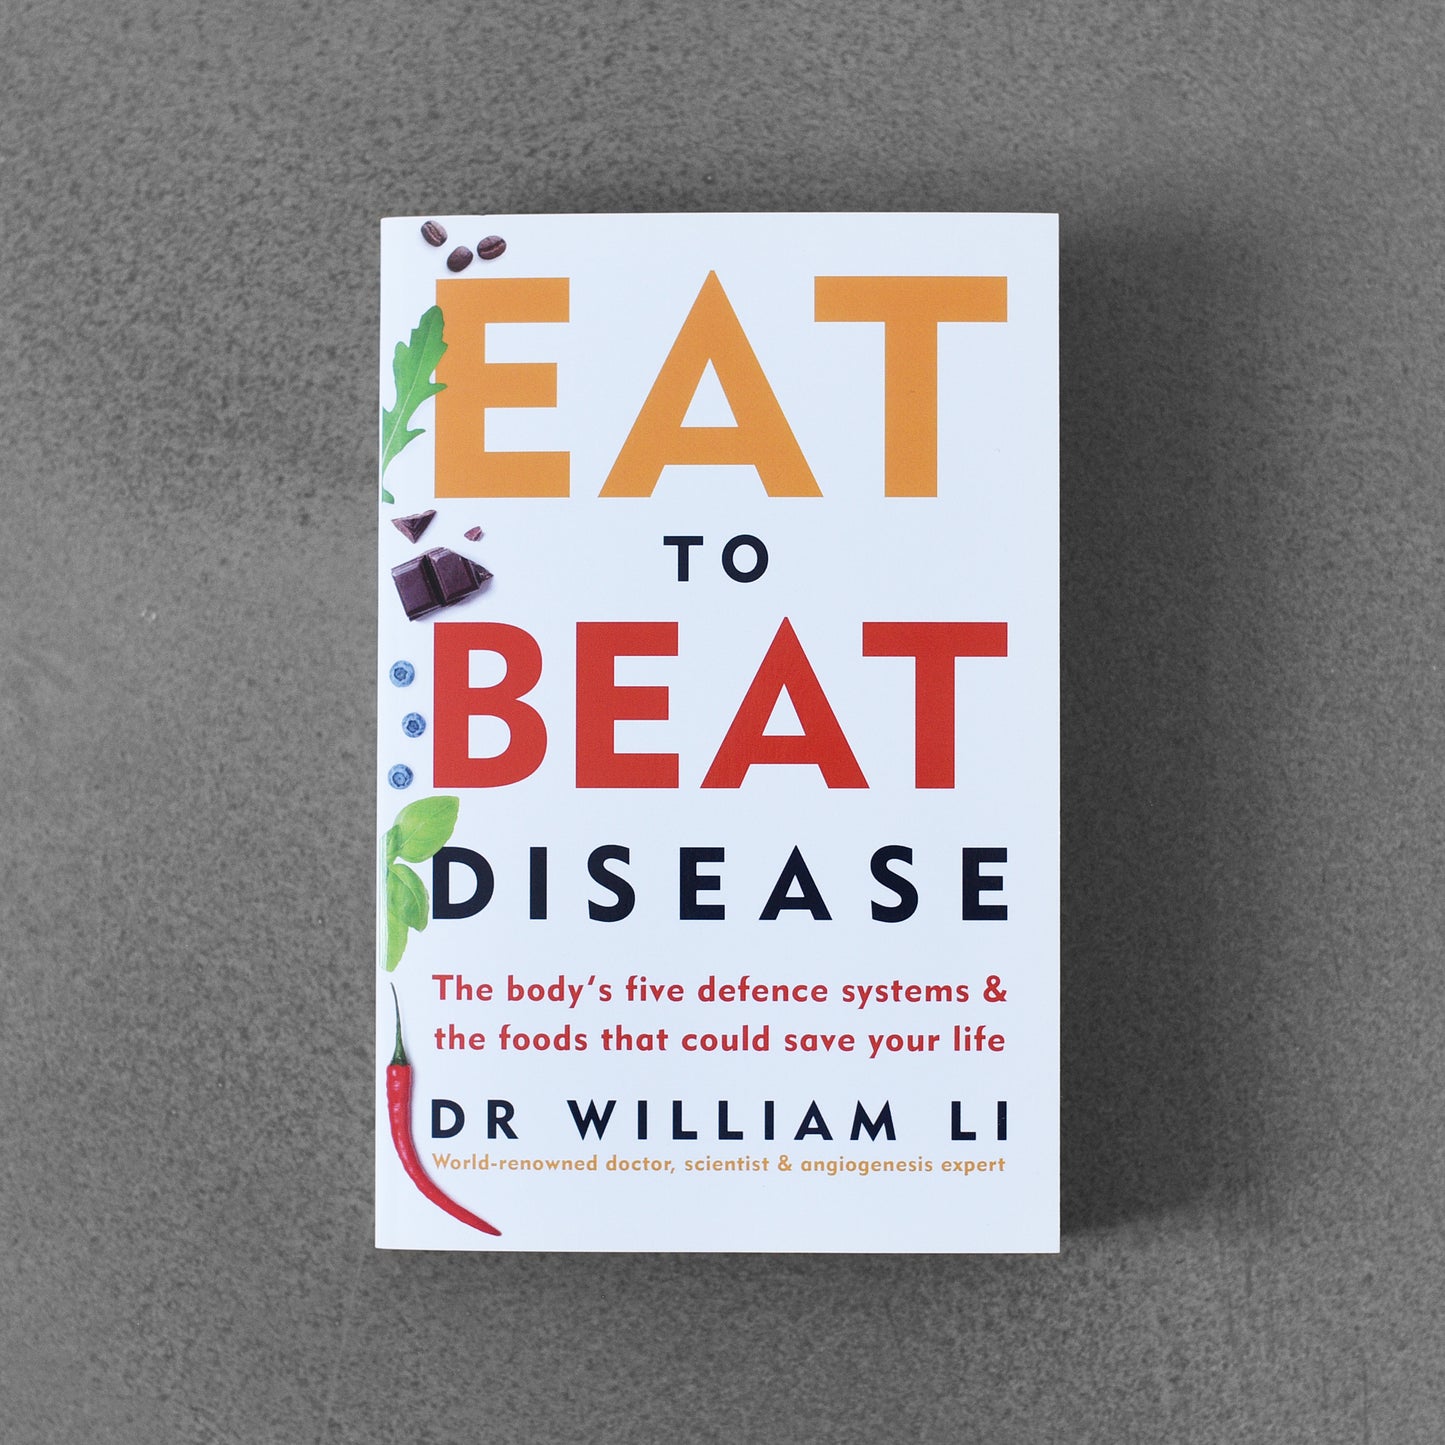 Eat to Beat Disease: The Body’s Five Defense Systems & The Foods That Could Save Your Life